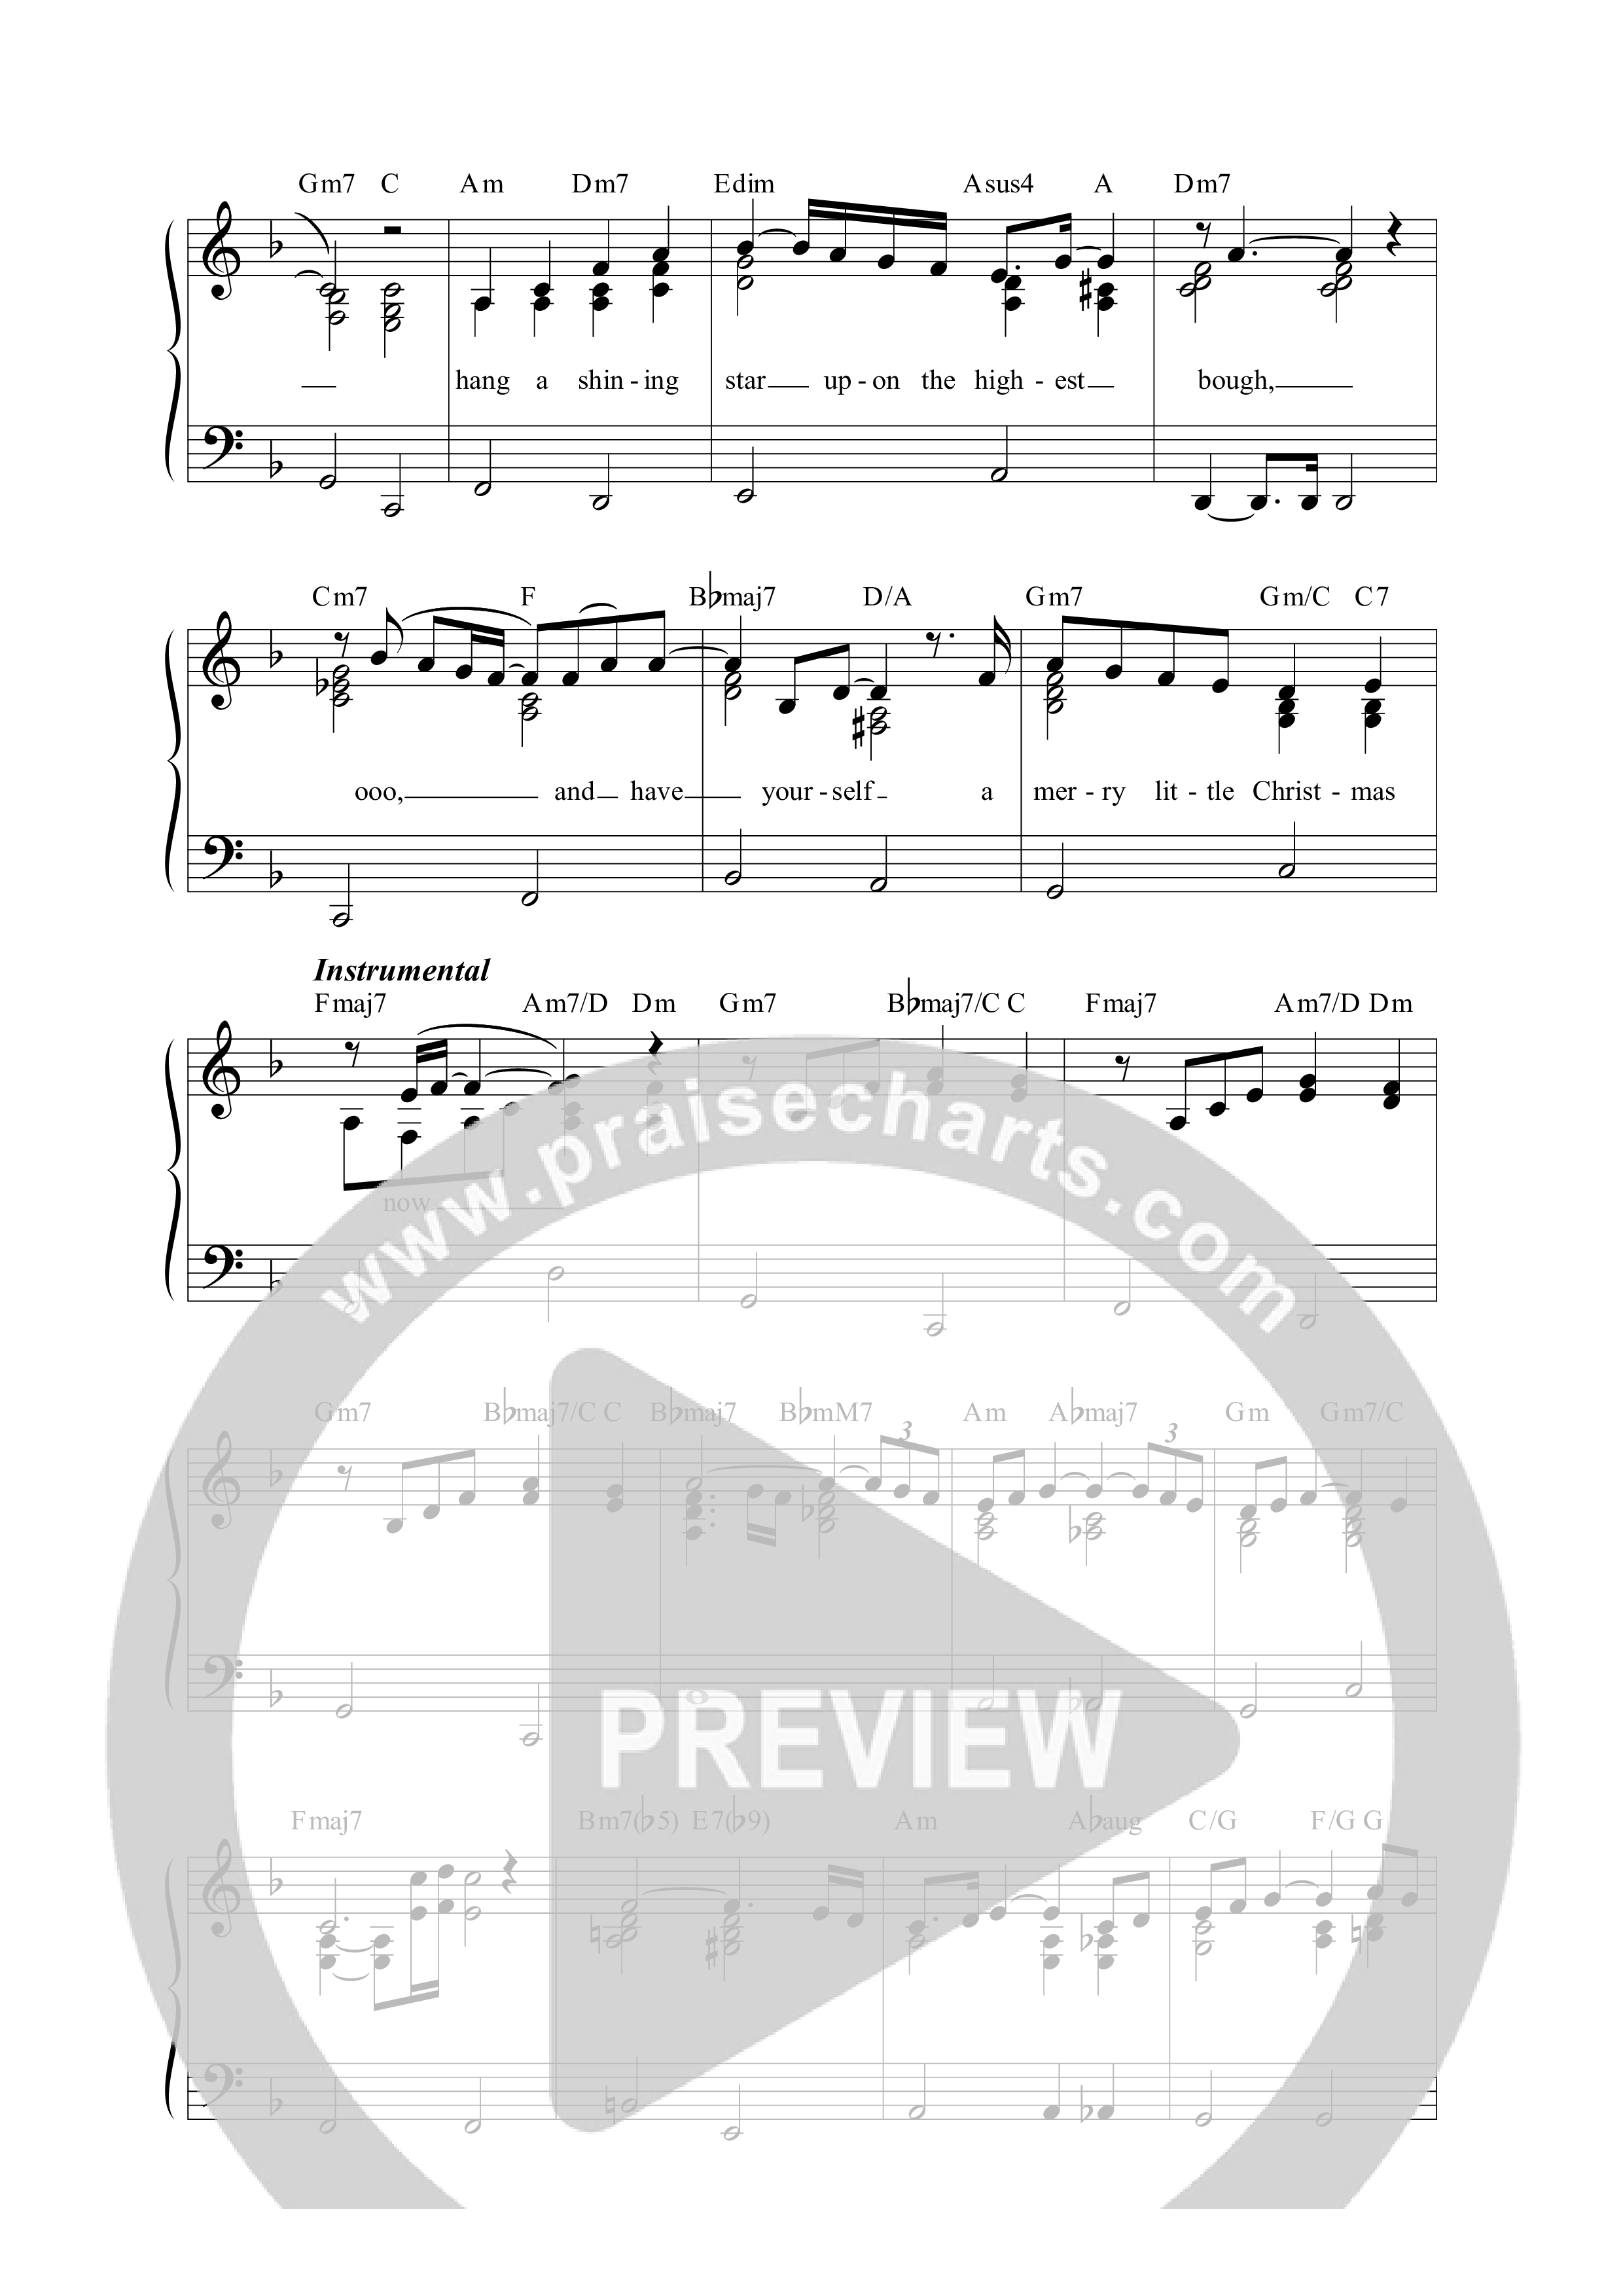 Have Yourself A Merry Little Christmas Lead Sheet Melody (Sarah Kroger)